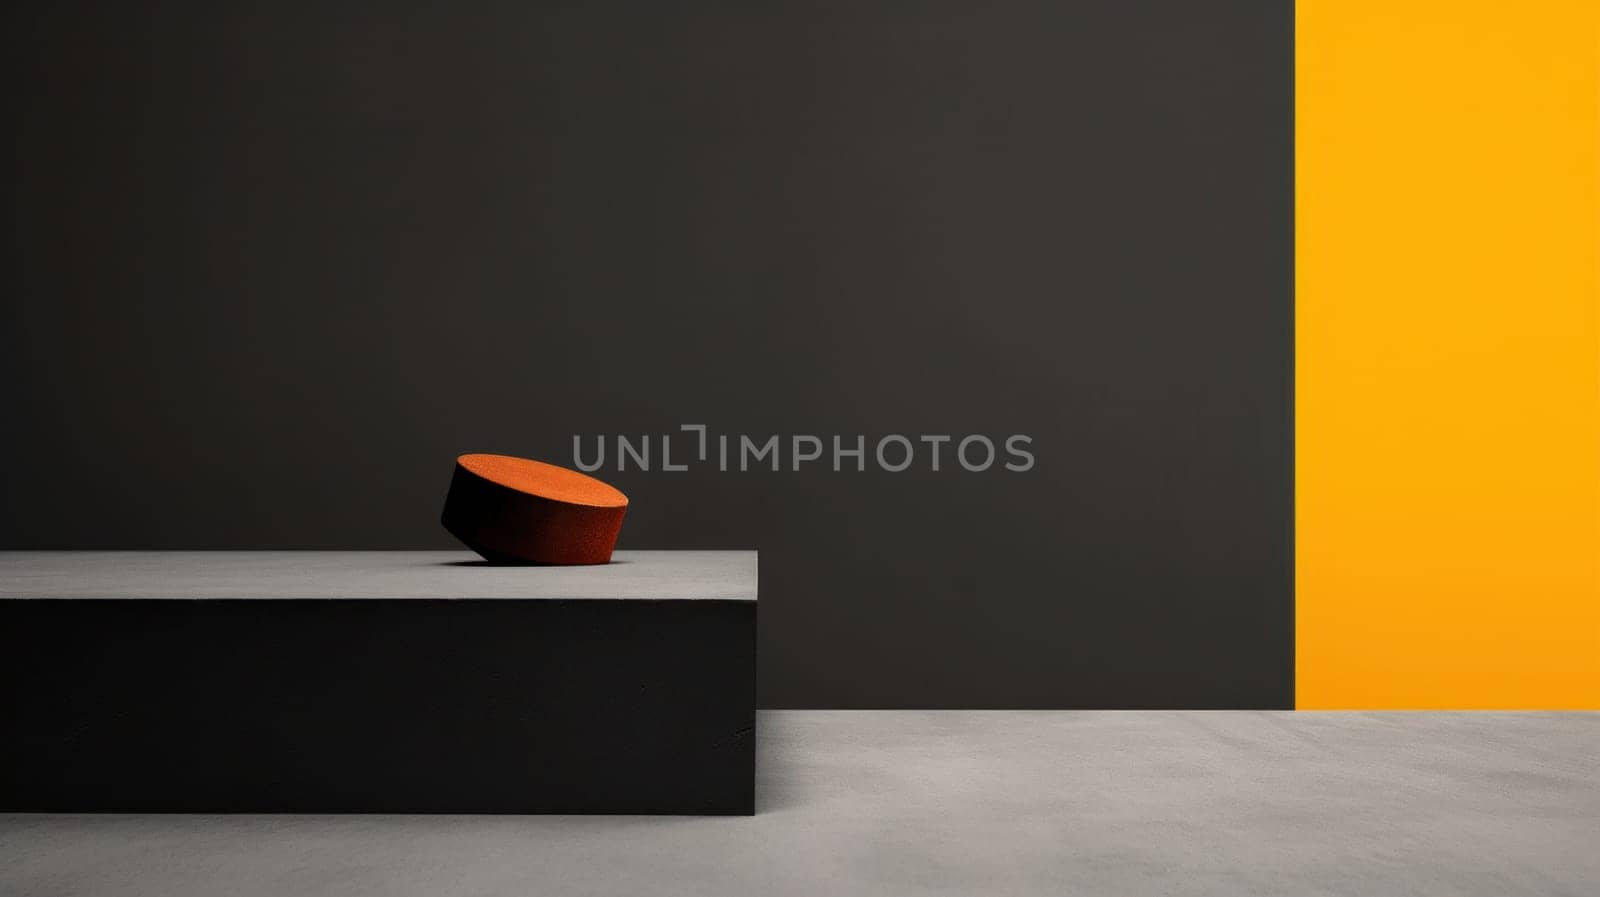 A red object sitting on a black and yellow wall, AI by starush